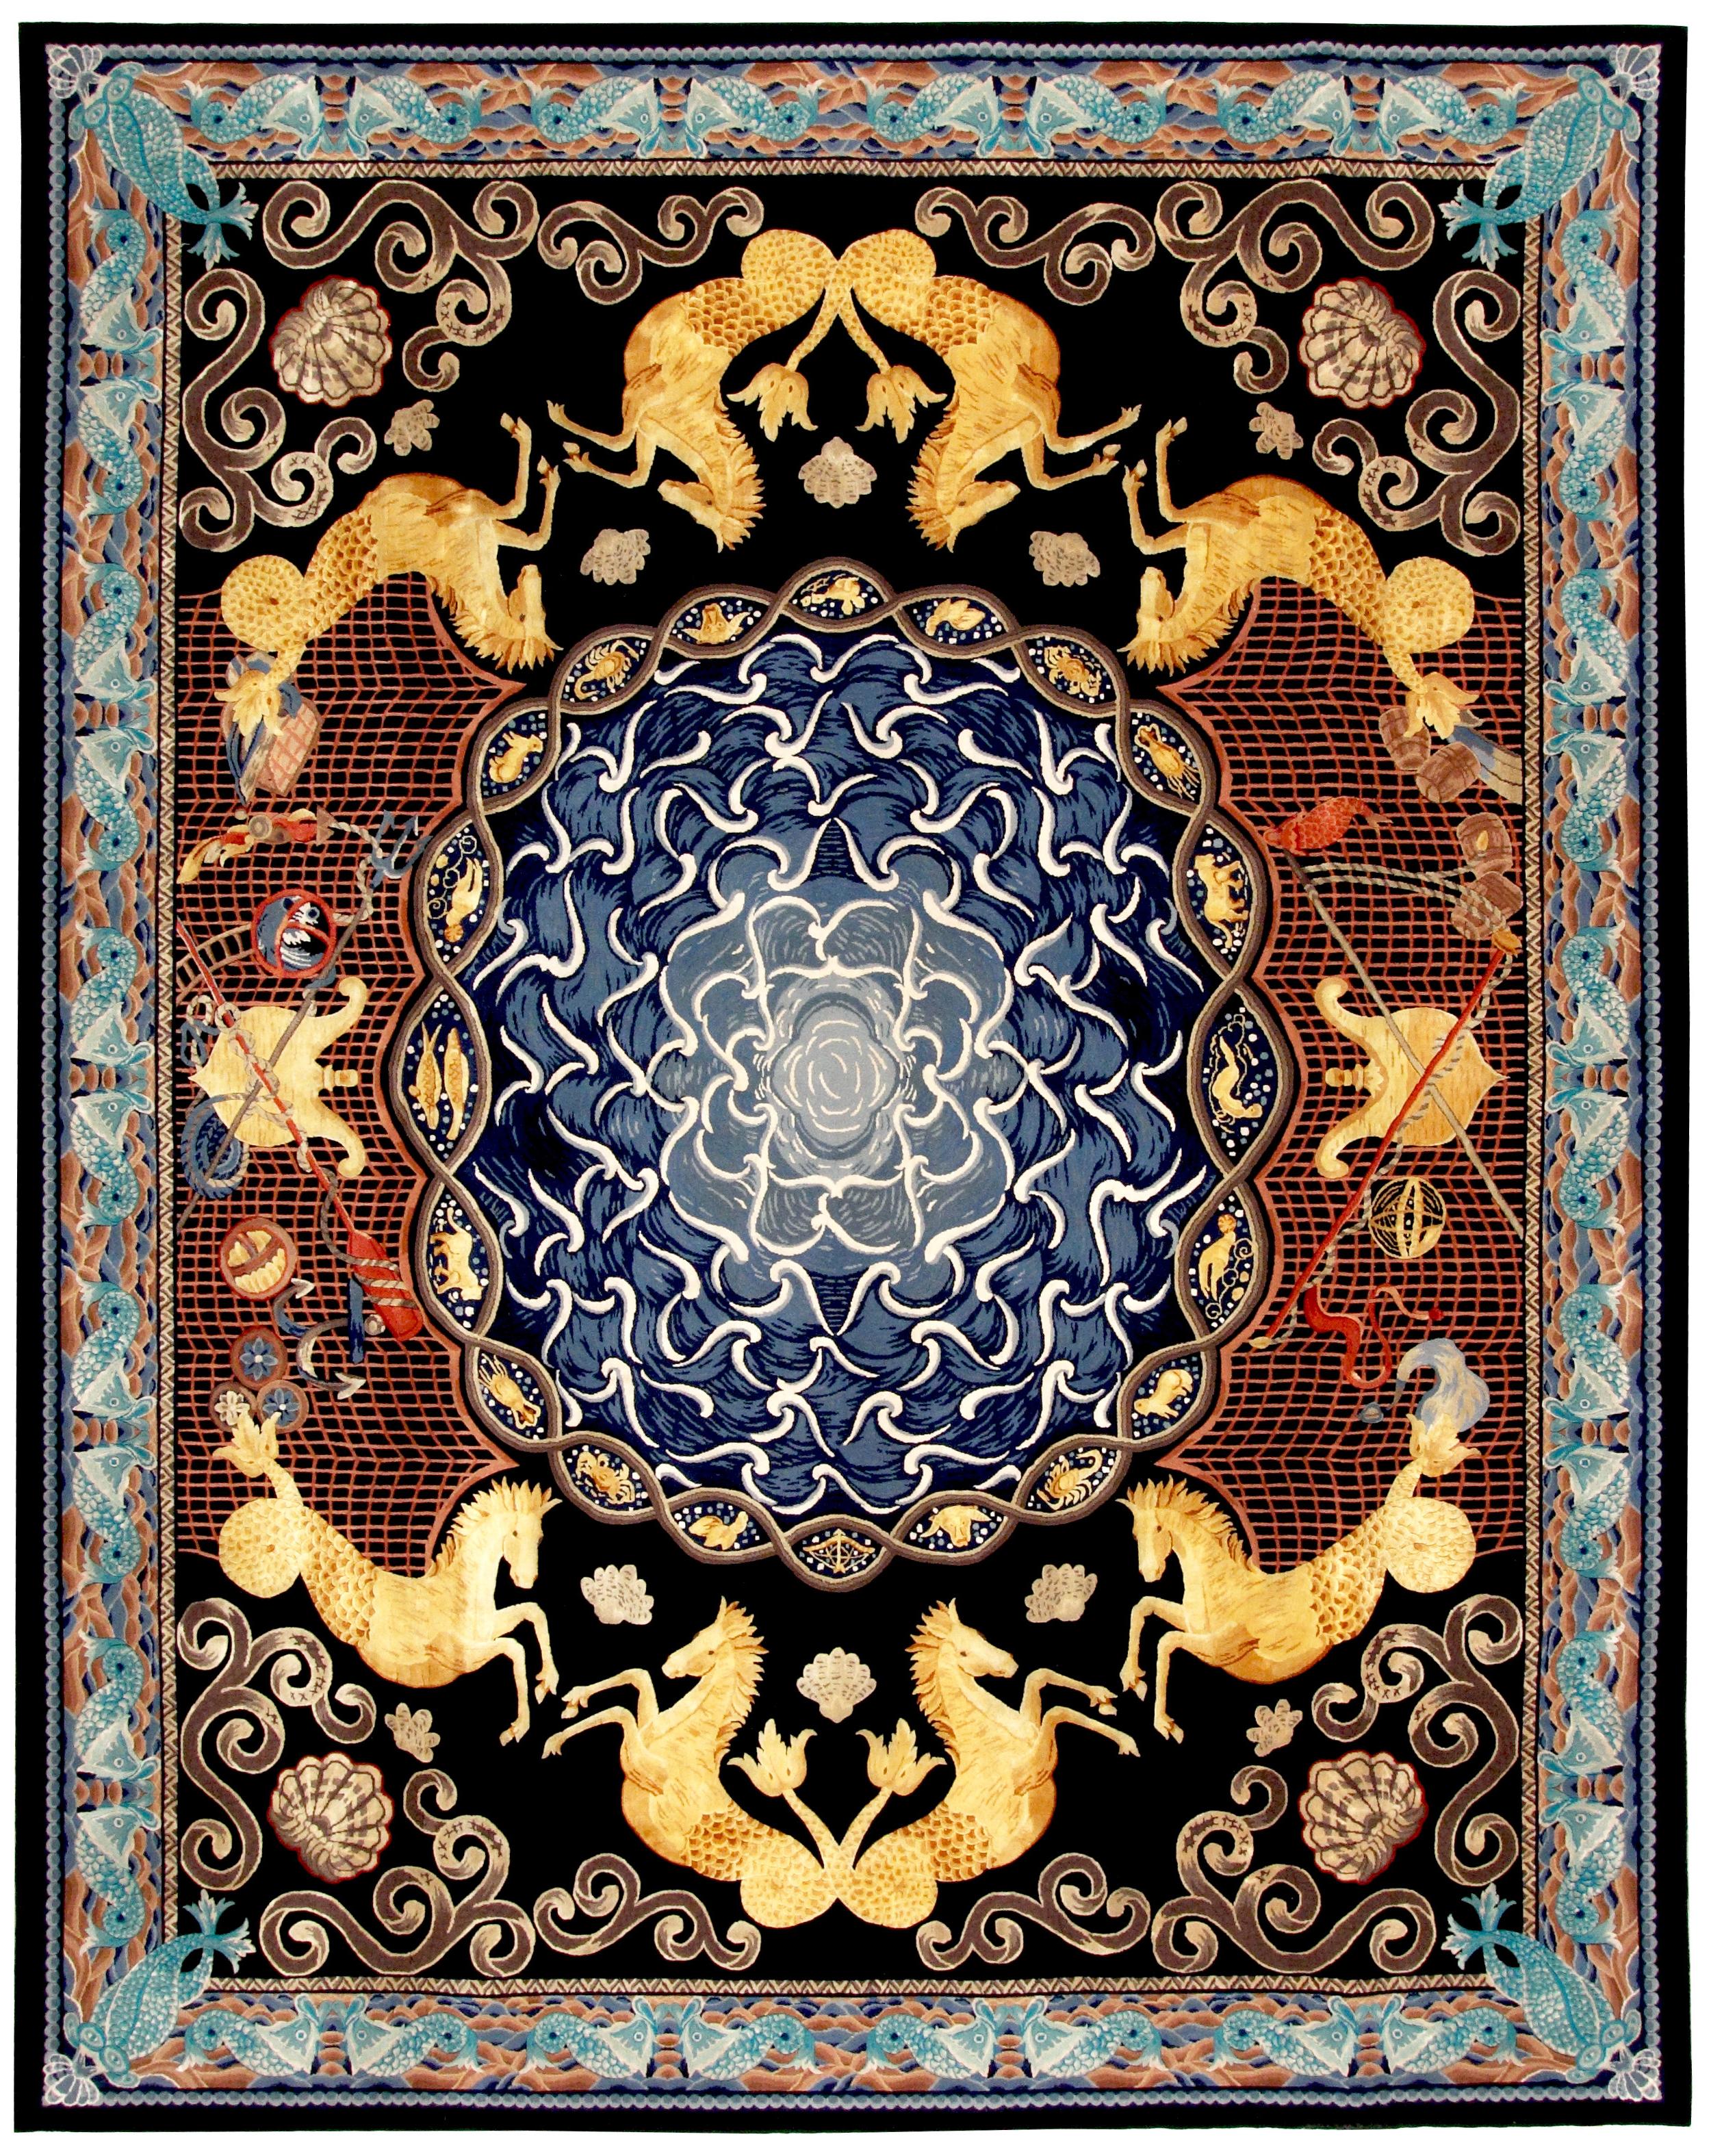 Other Via Como, 'Zodiaco' Rug Wool and Silk Hand Knotted Rug 